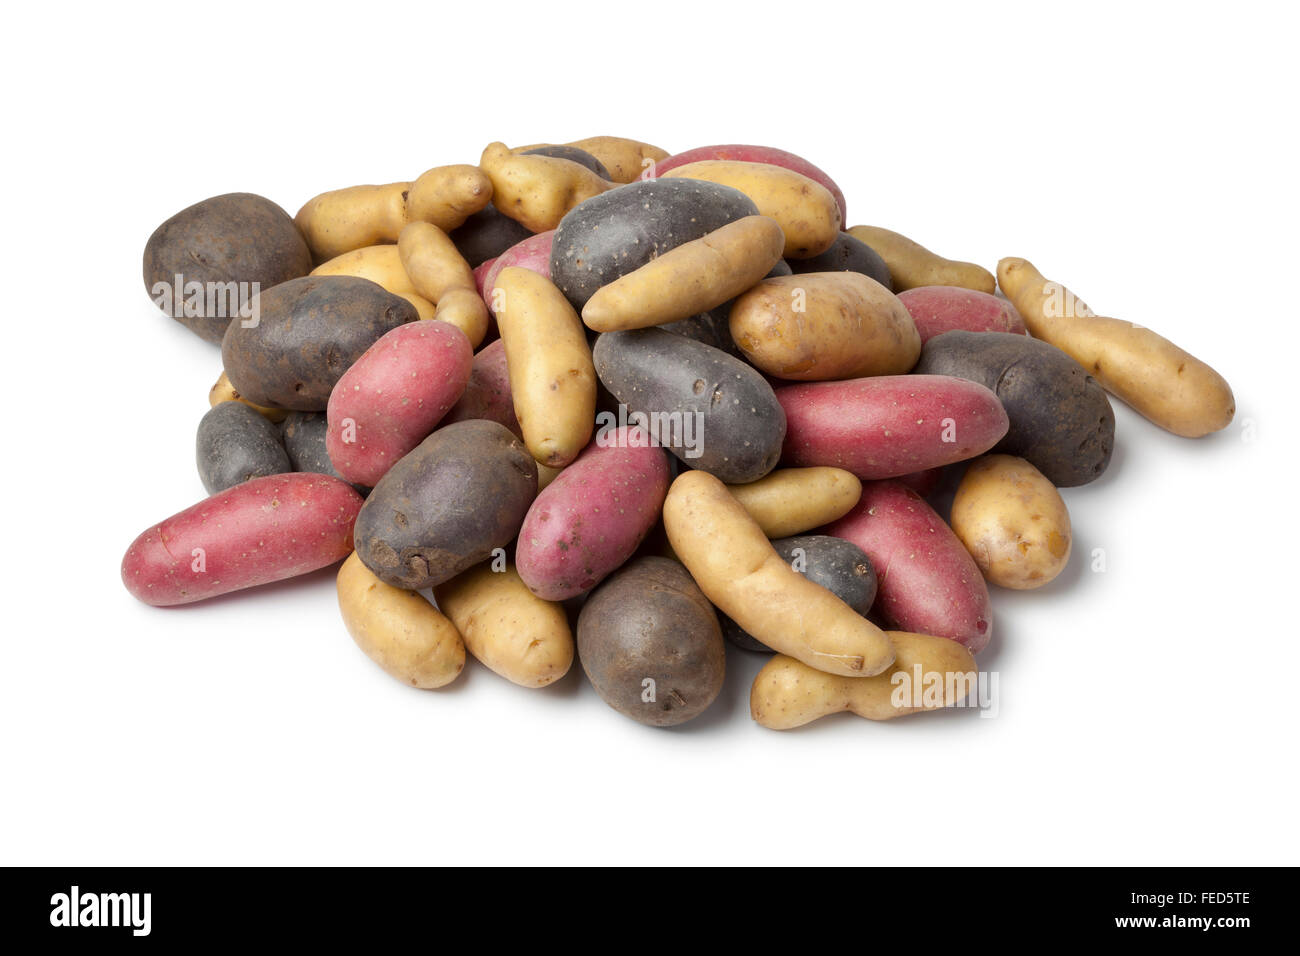 Variety of heirloom gourmet potatoes on white background Stock Photo